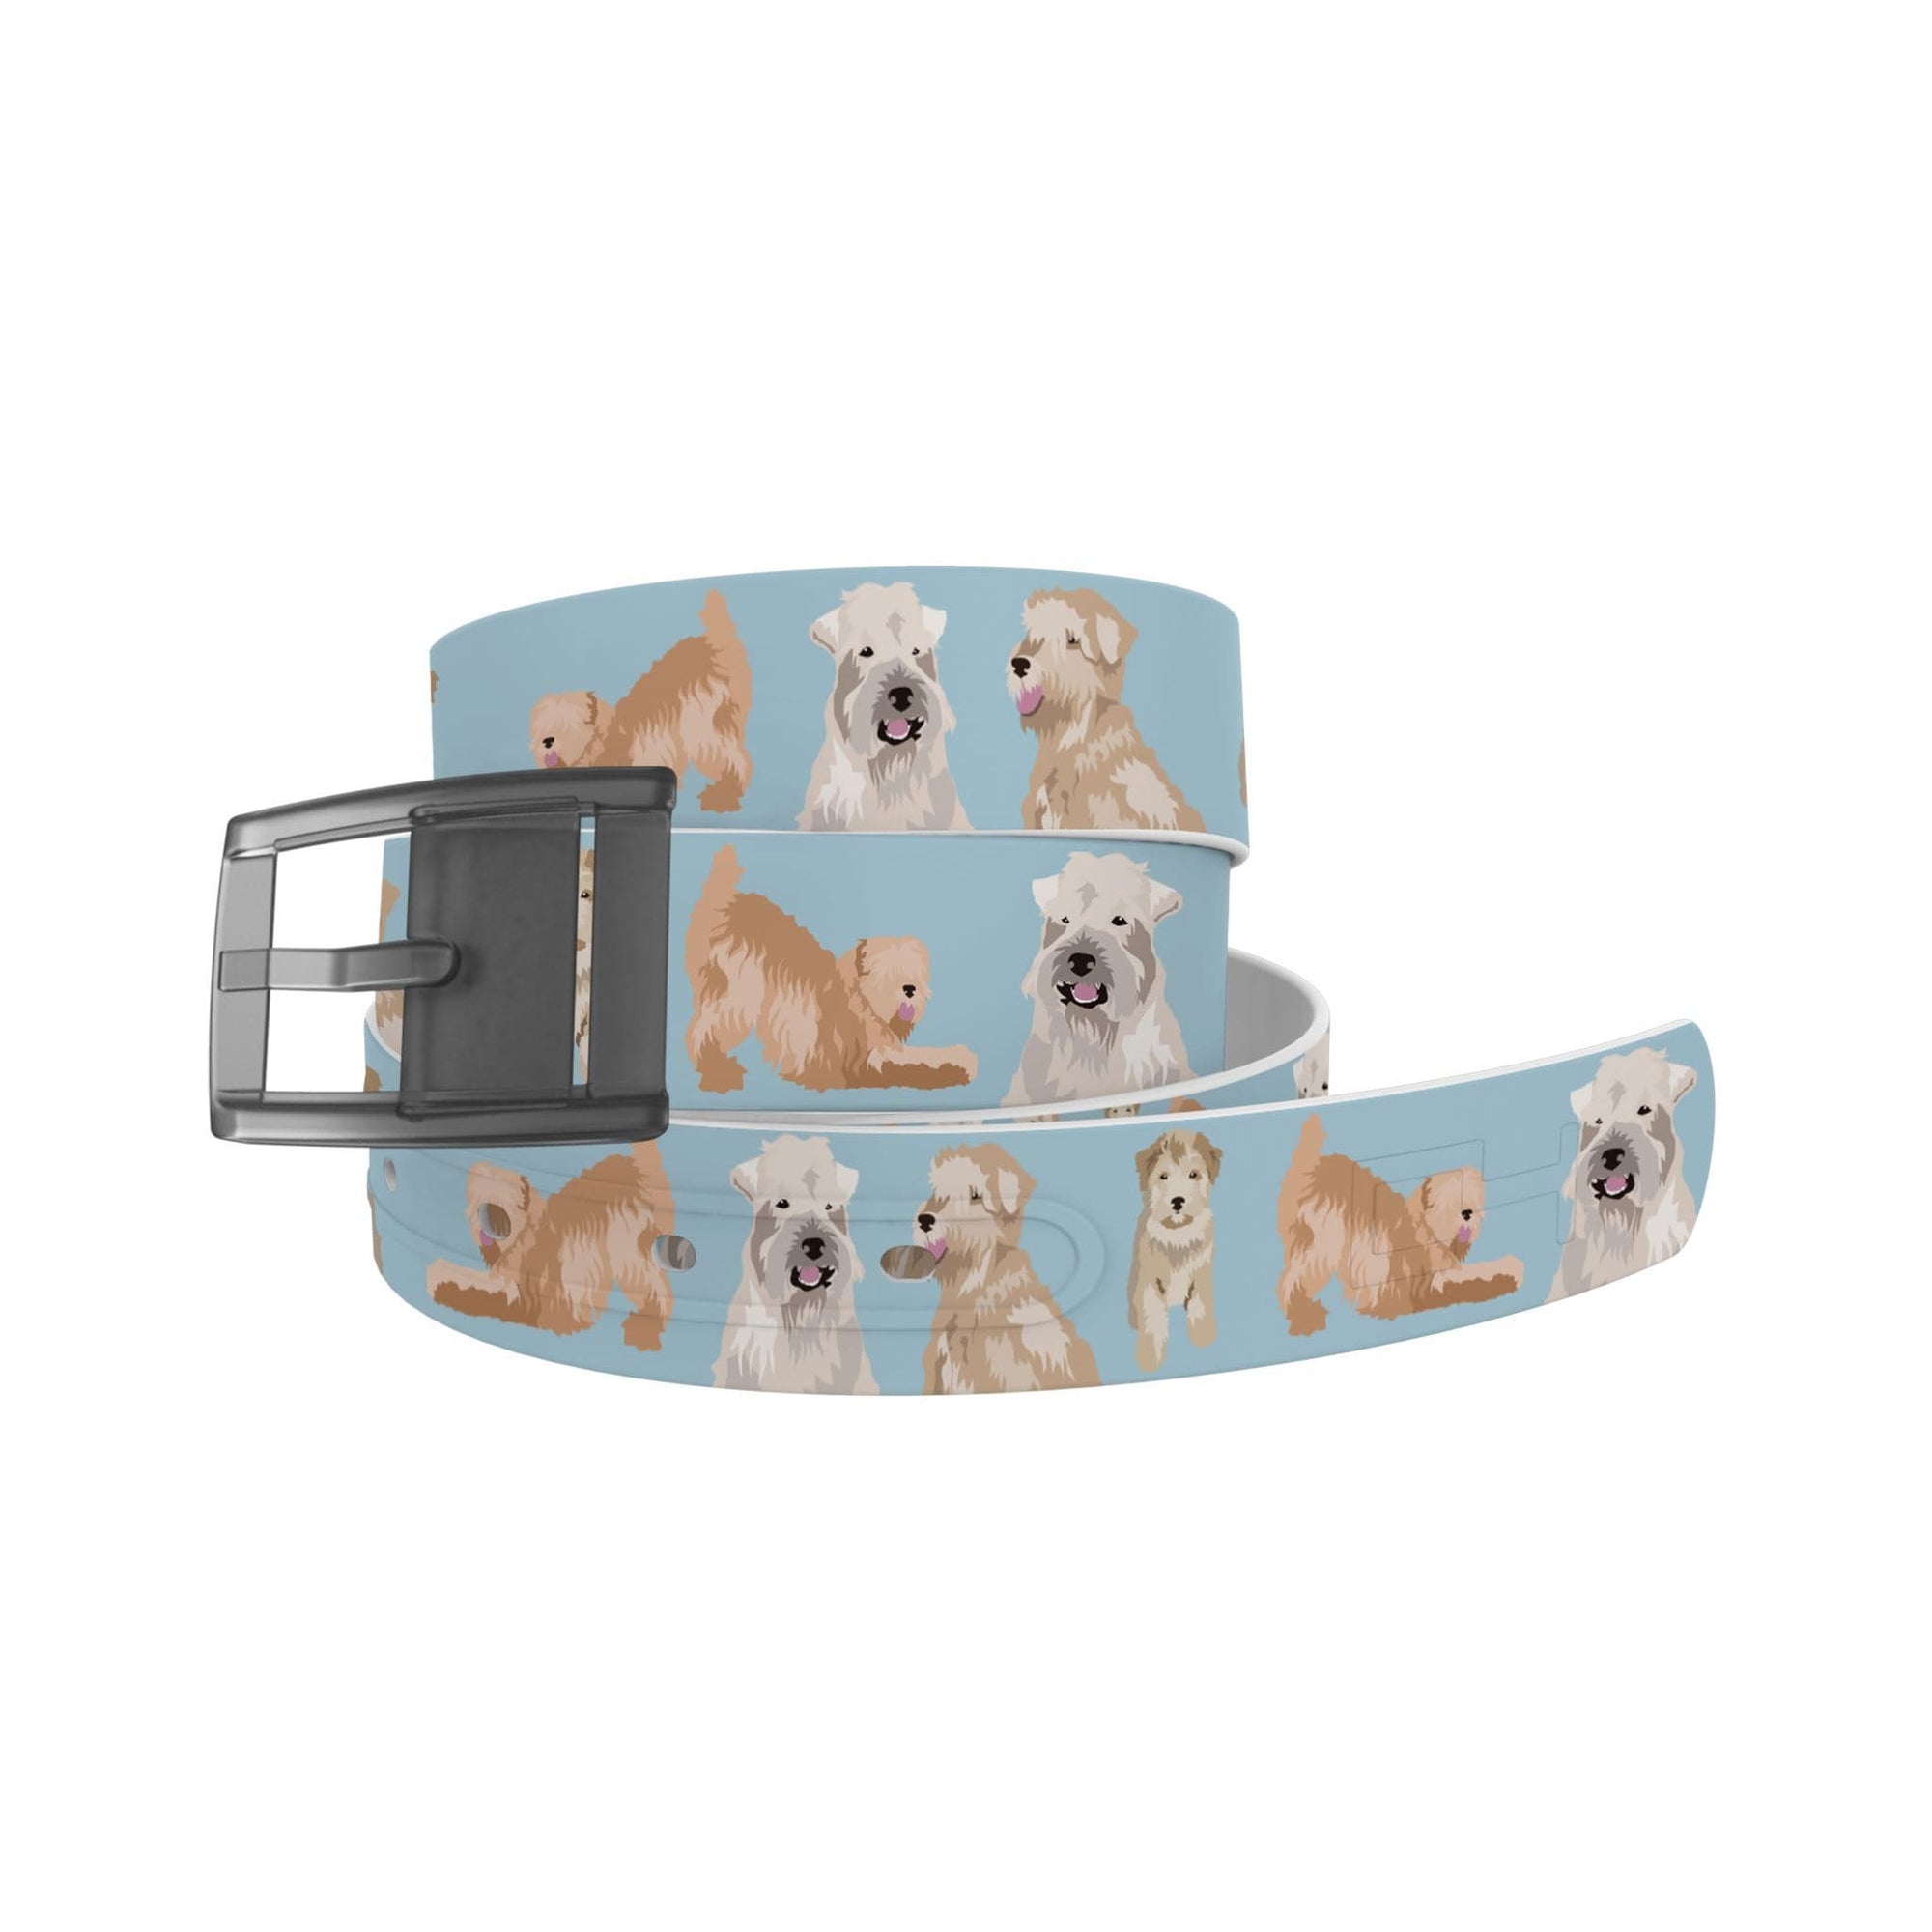 C4 Belts Belt C4-Belt (Soft Coated Wheaten Terrier) equestrian team apparel online tack store mobile tack store custom farm apparel custom show stable clothing equestrian lifestyle horse show clothing riding clothes horses equestrian tack store